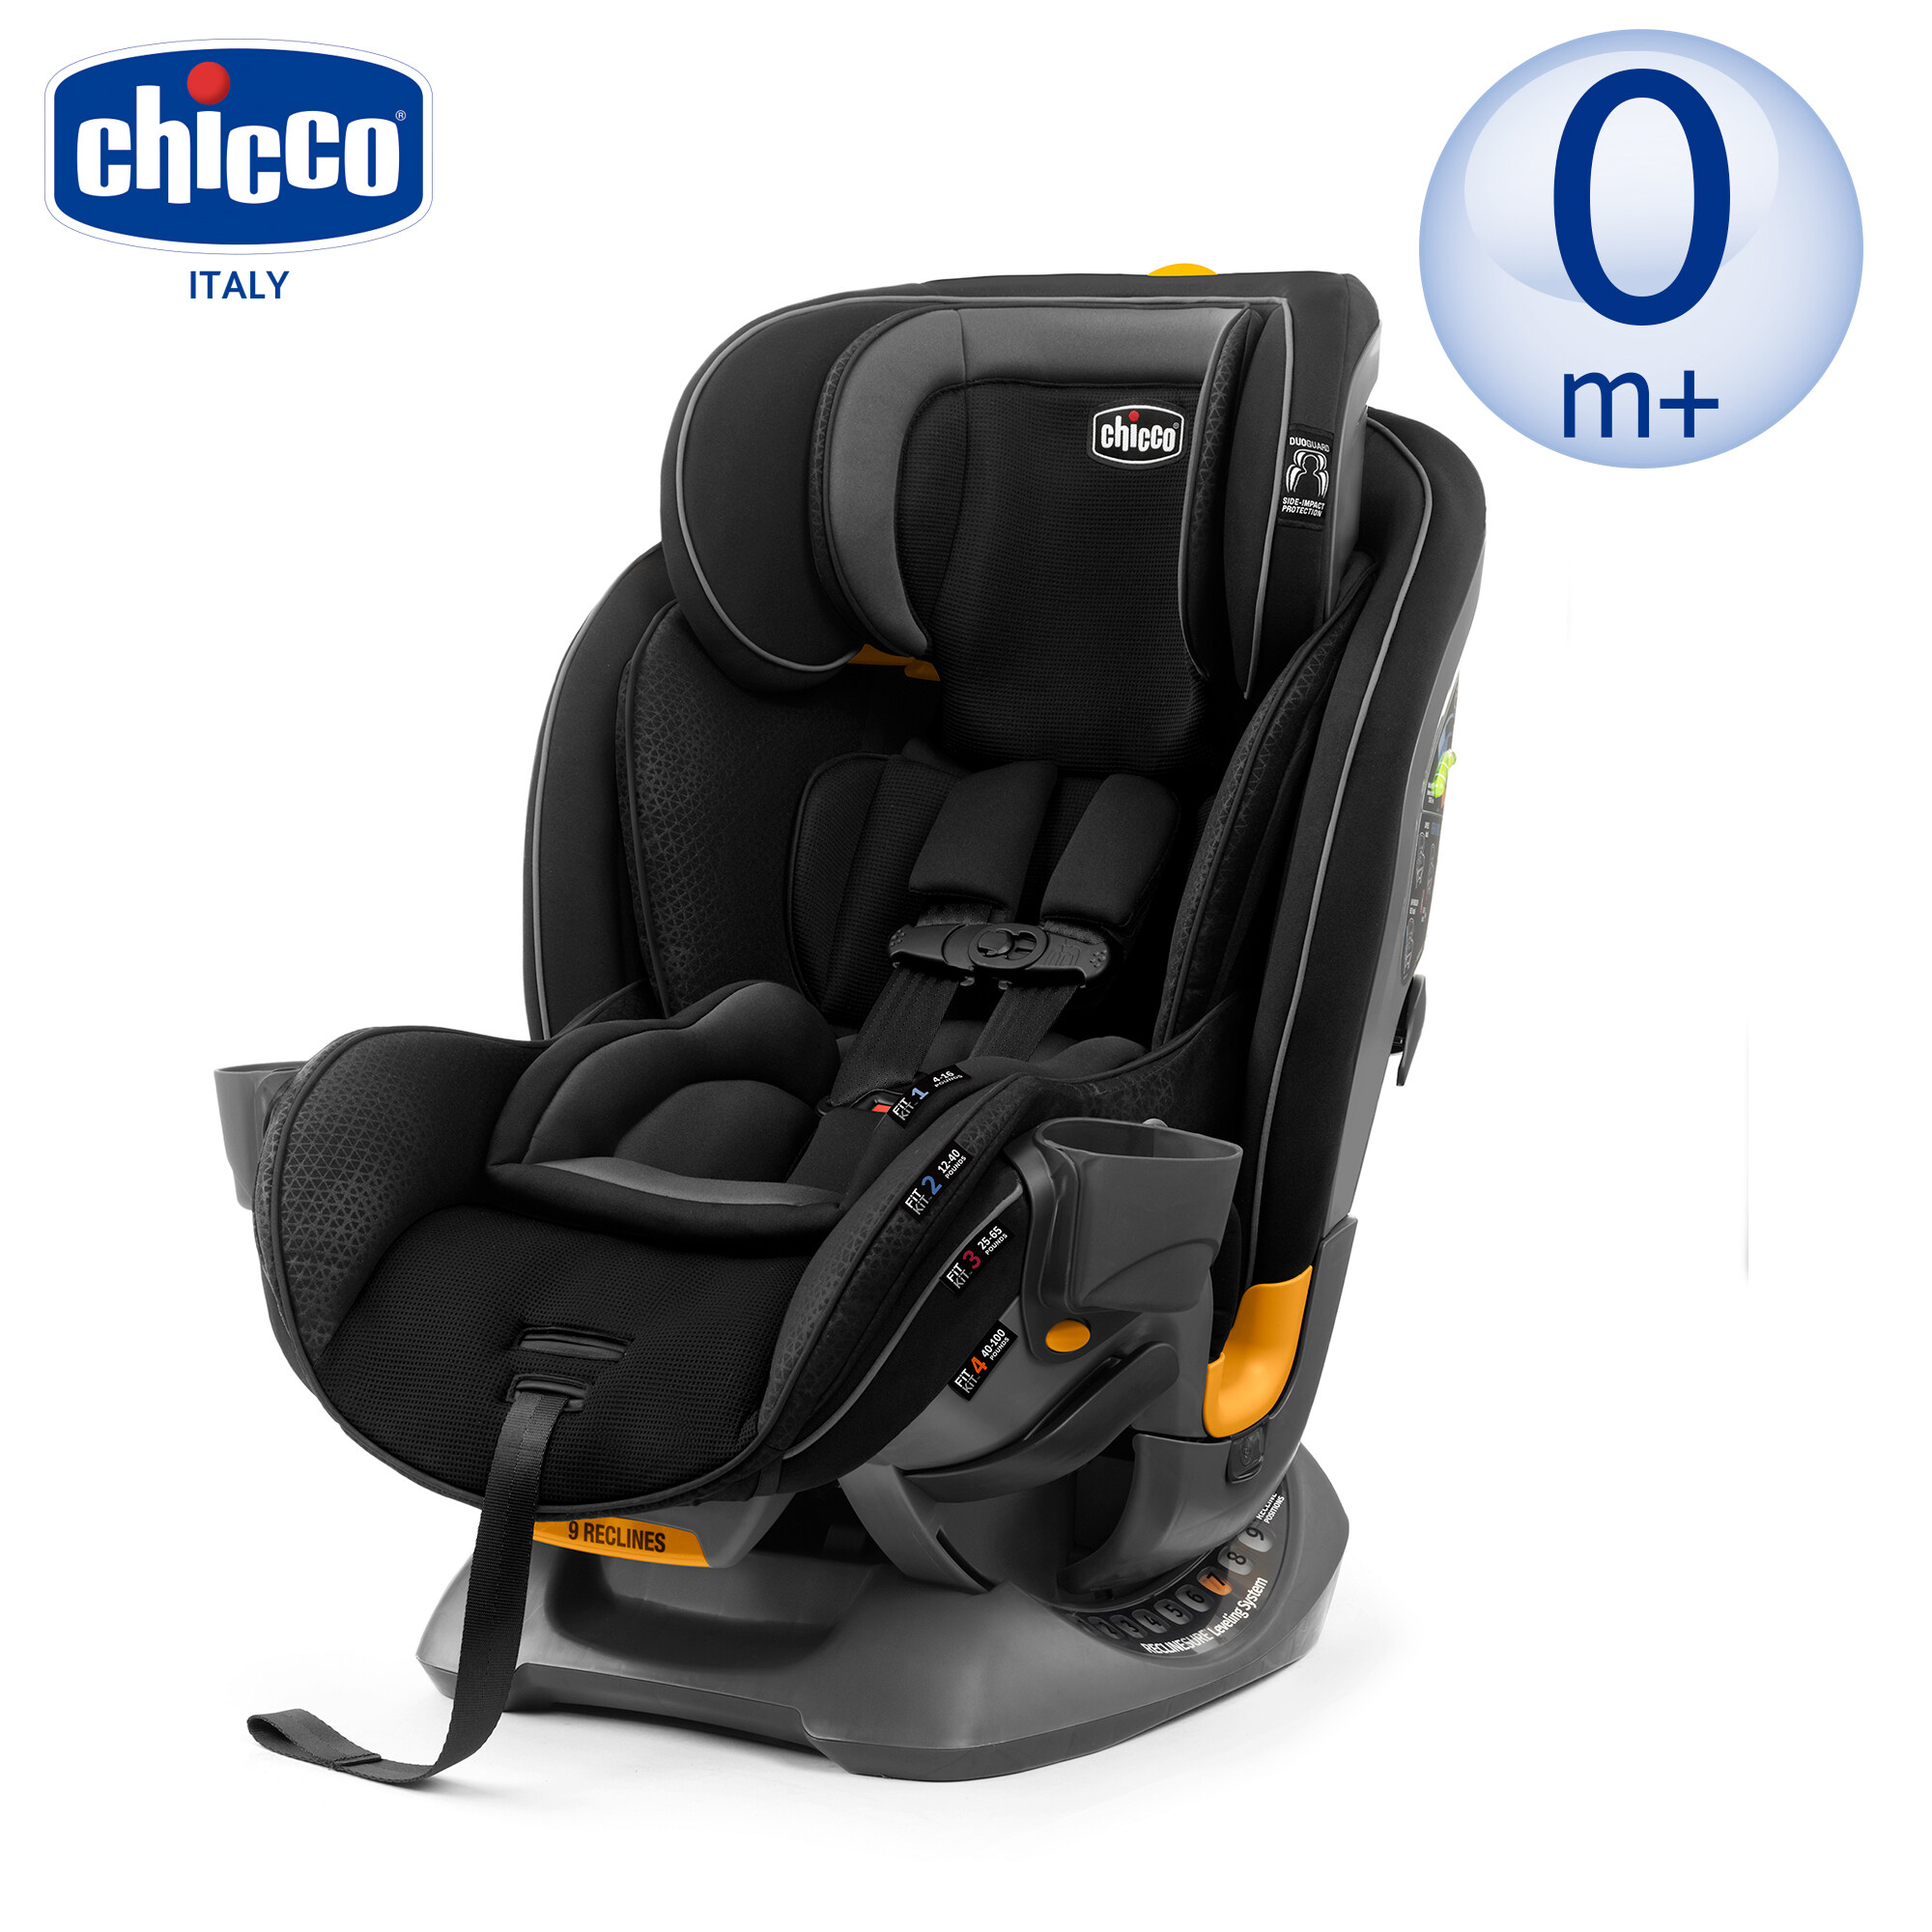 Chicco Fit4 Convertible Baby Car Seat